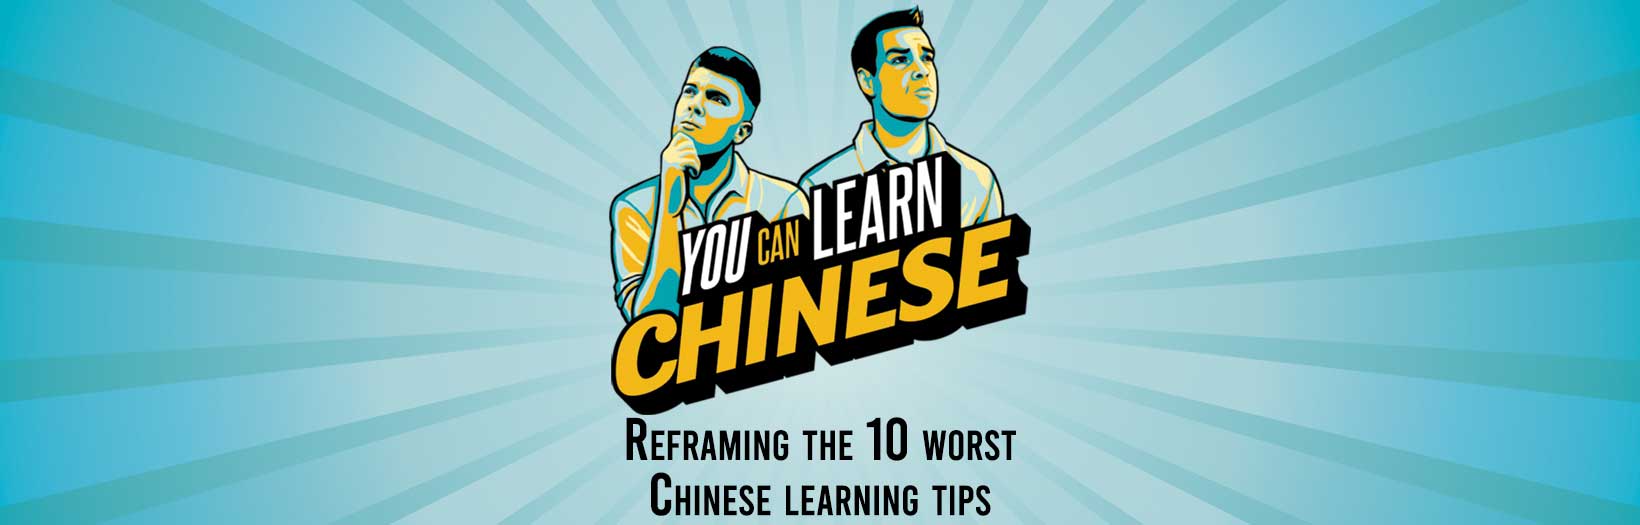 Reframing the 10 worst Chinese learning tips